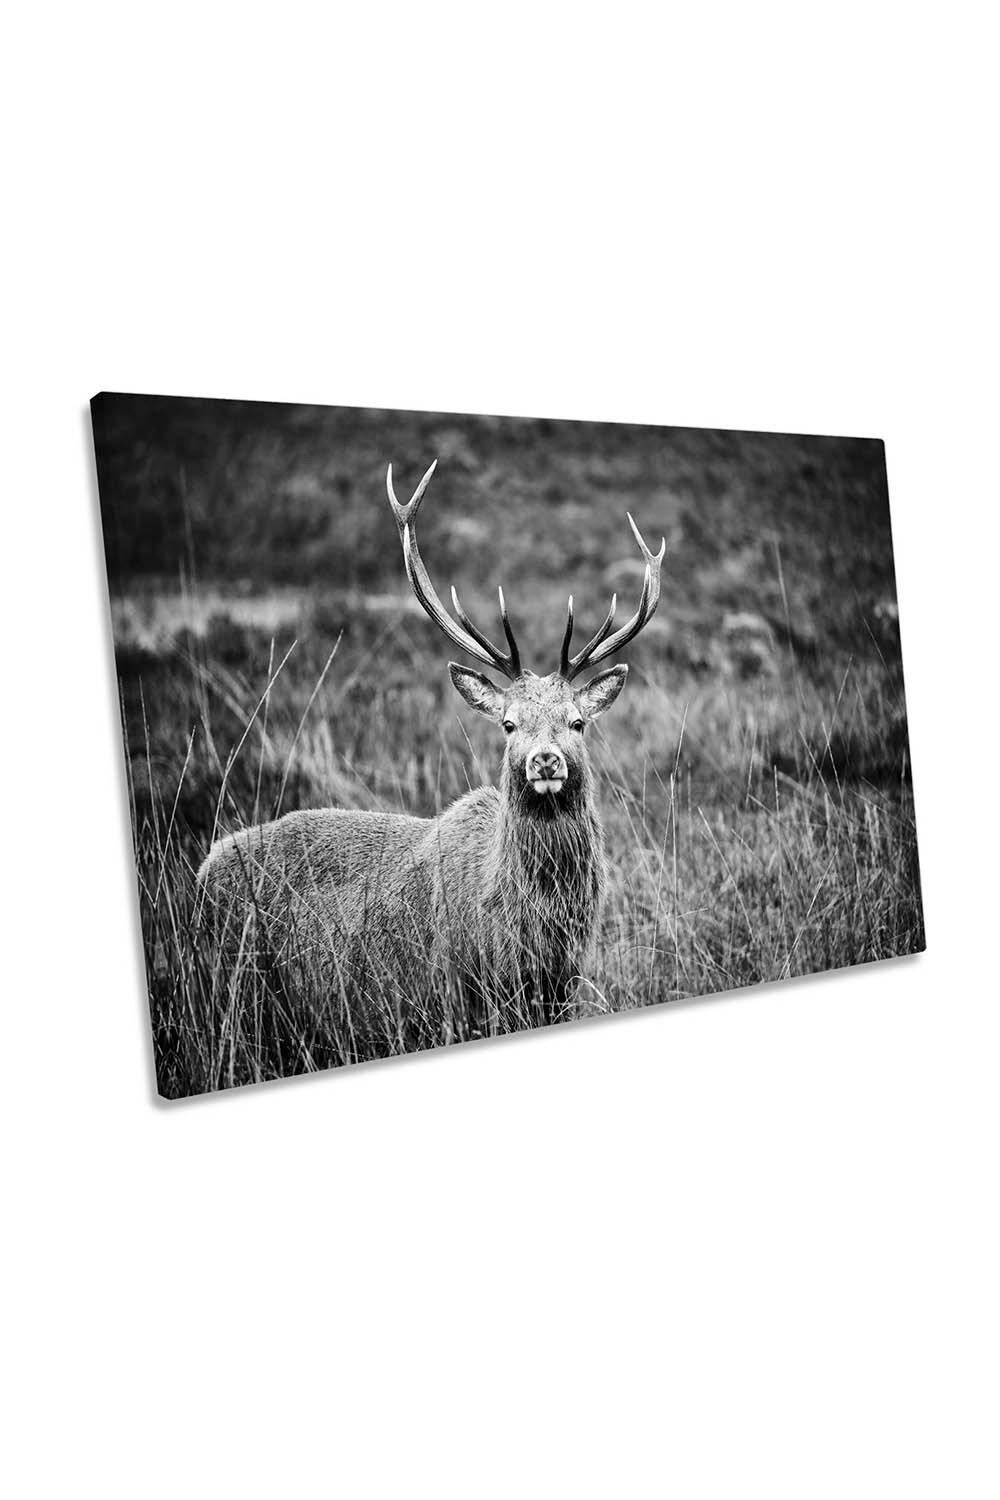 Being Noticed Stag Deer Antlers Wildlife Canvas Wall Art Picture Print